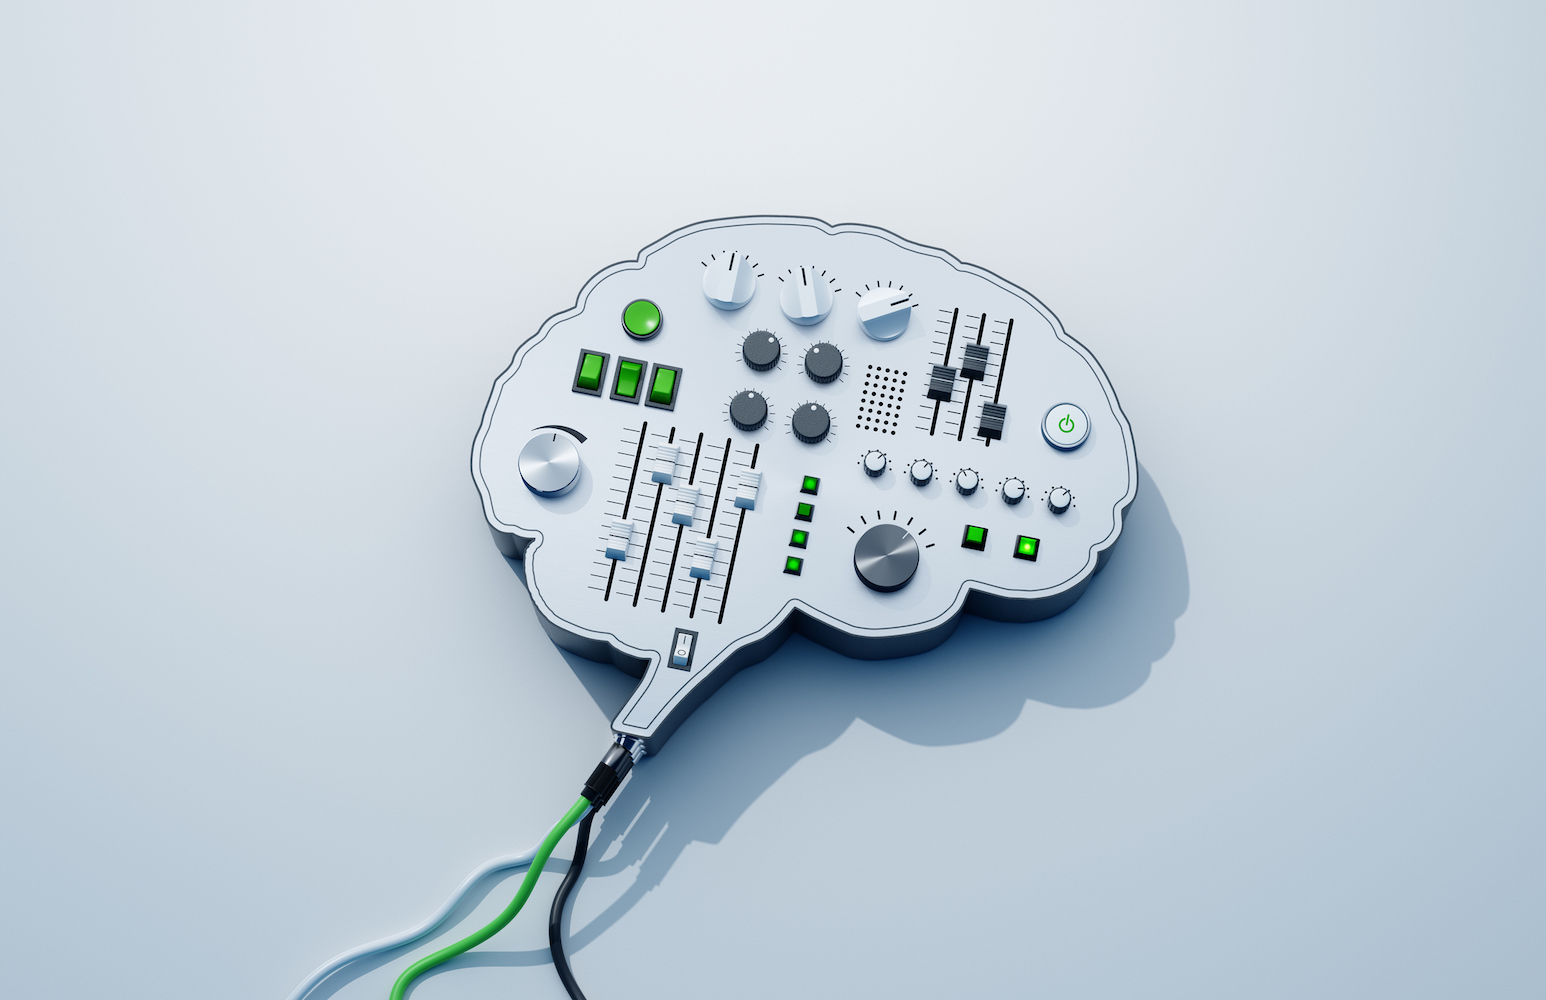 digitally generated image of a brain-shaped console with buttons and knobs